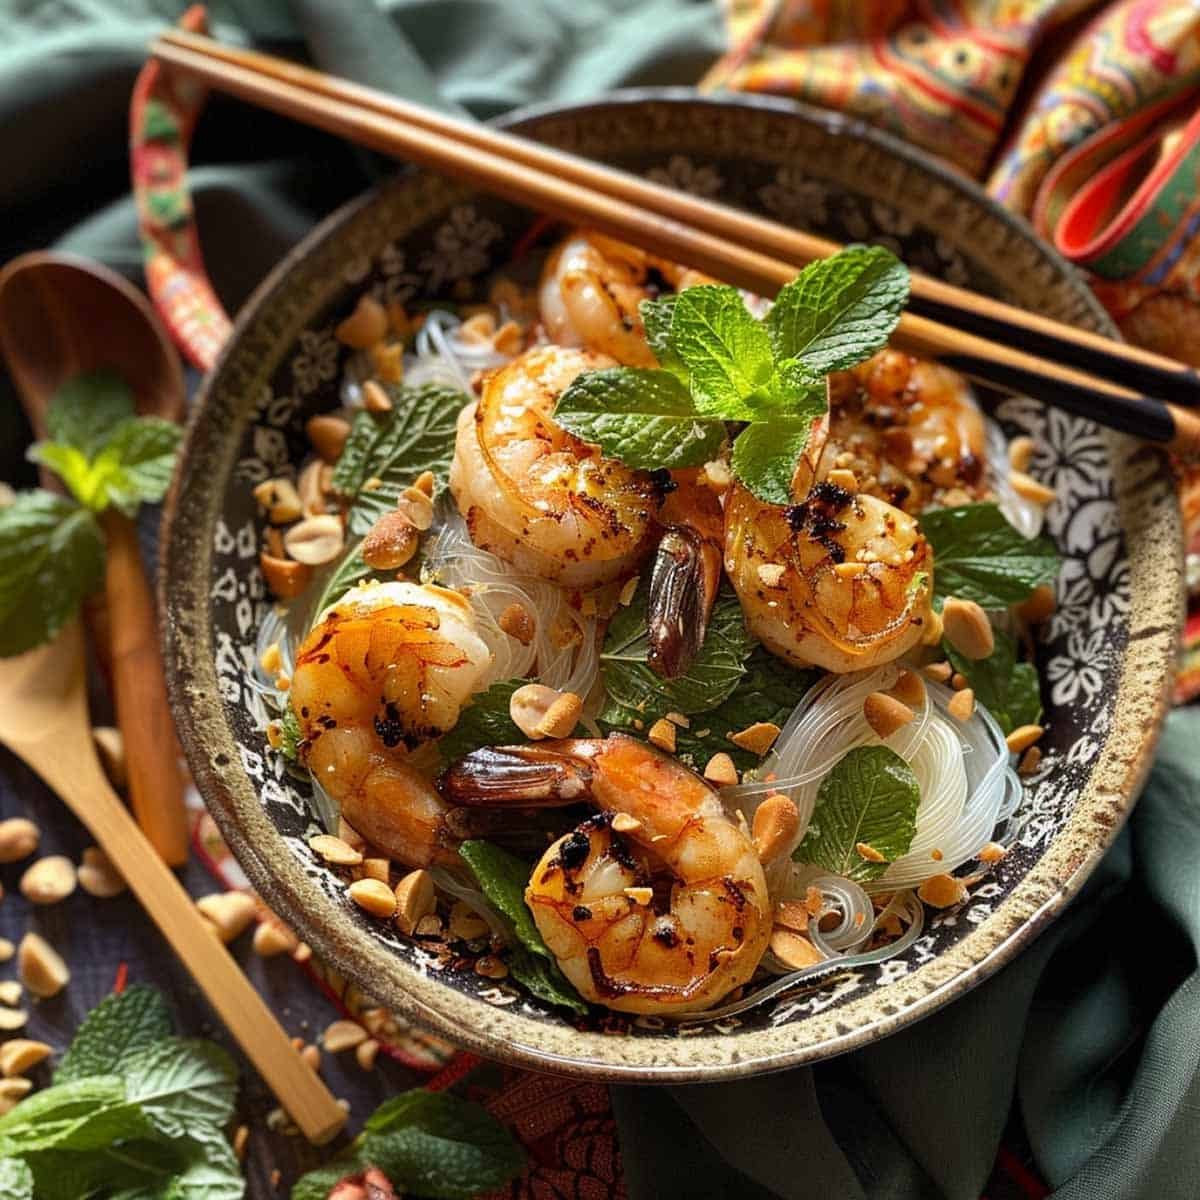 Yum Woon Sen glass noodle salad topped with grilled shrimp and chopsticks elegantly placed on the bowl, showcasing a vibrant Thai dish.